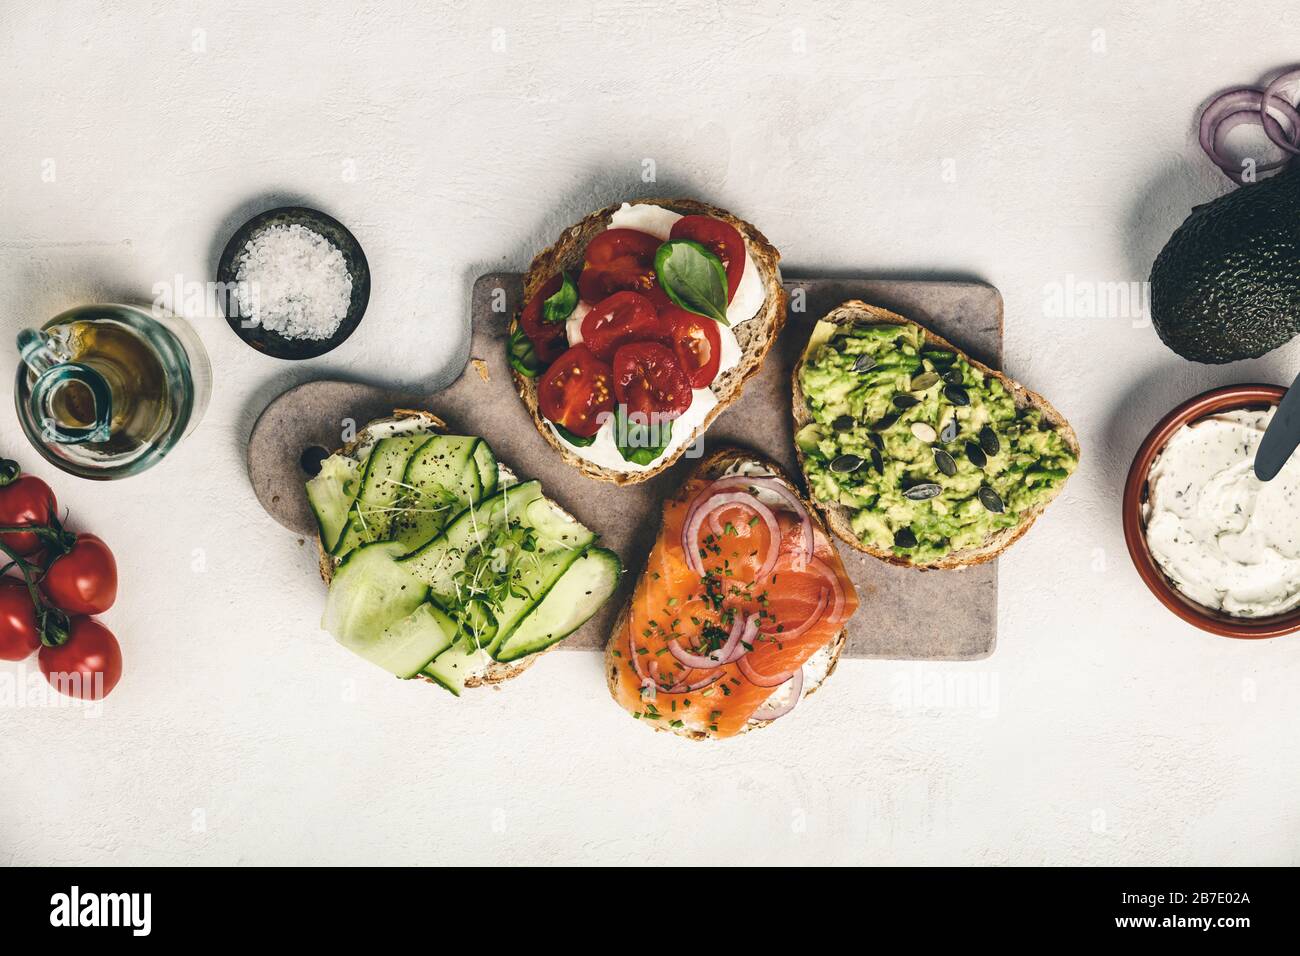 Variety of sandwiches for breakfast, snack, appetizers - avocado puree, mozzarella, tomatoes, basil, cream cheese, smoked salmon, red onion, cucumber Stock Photo